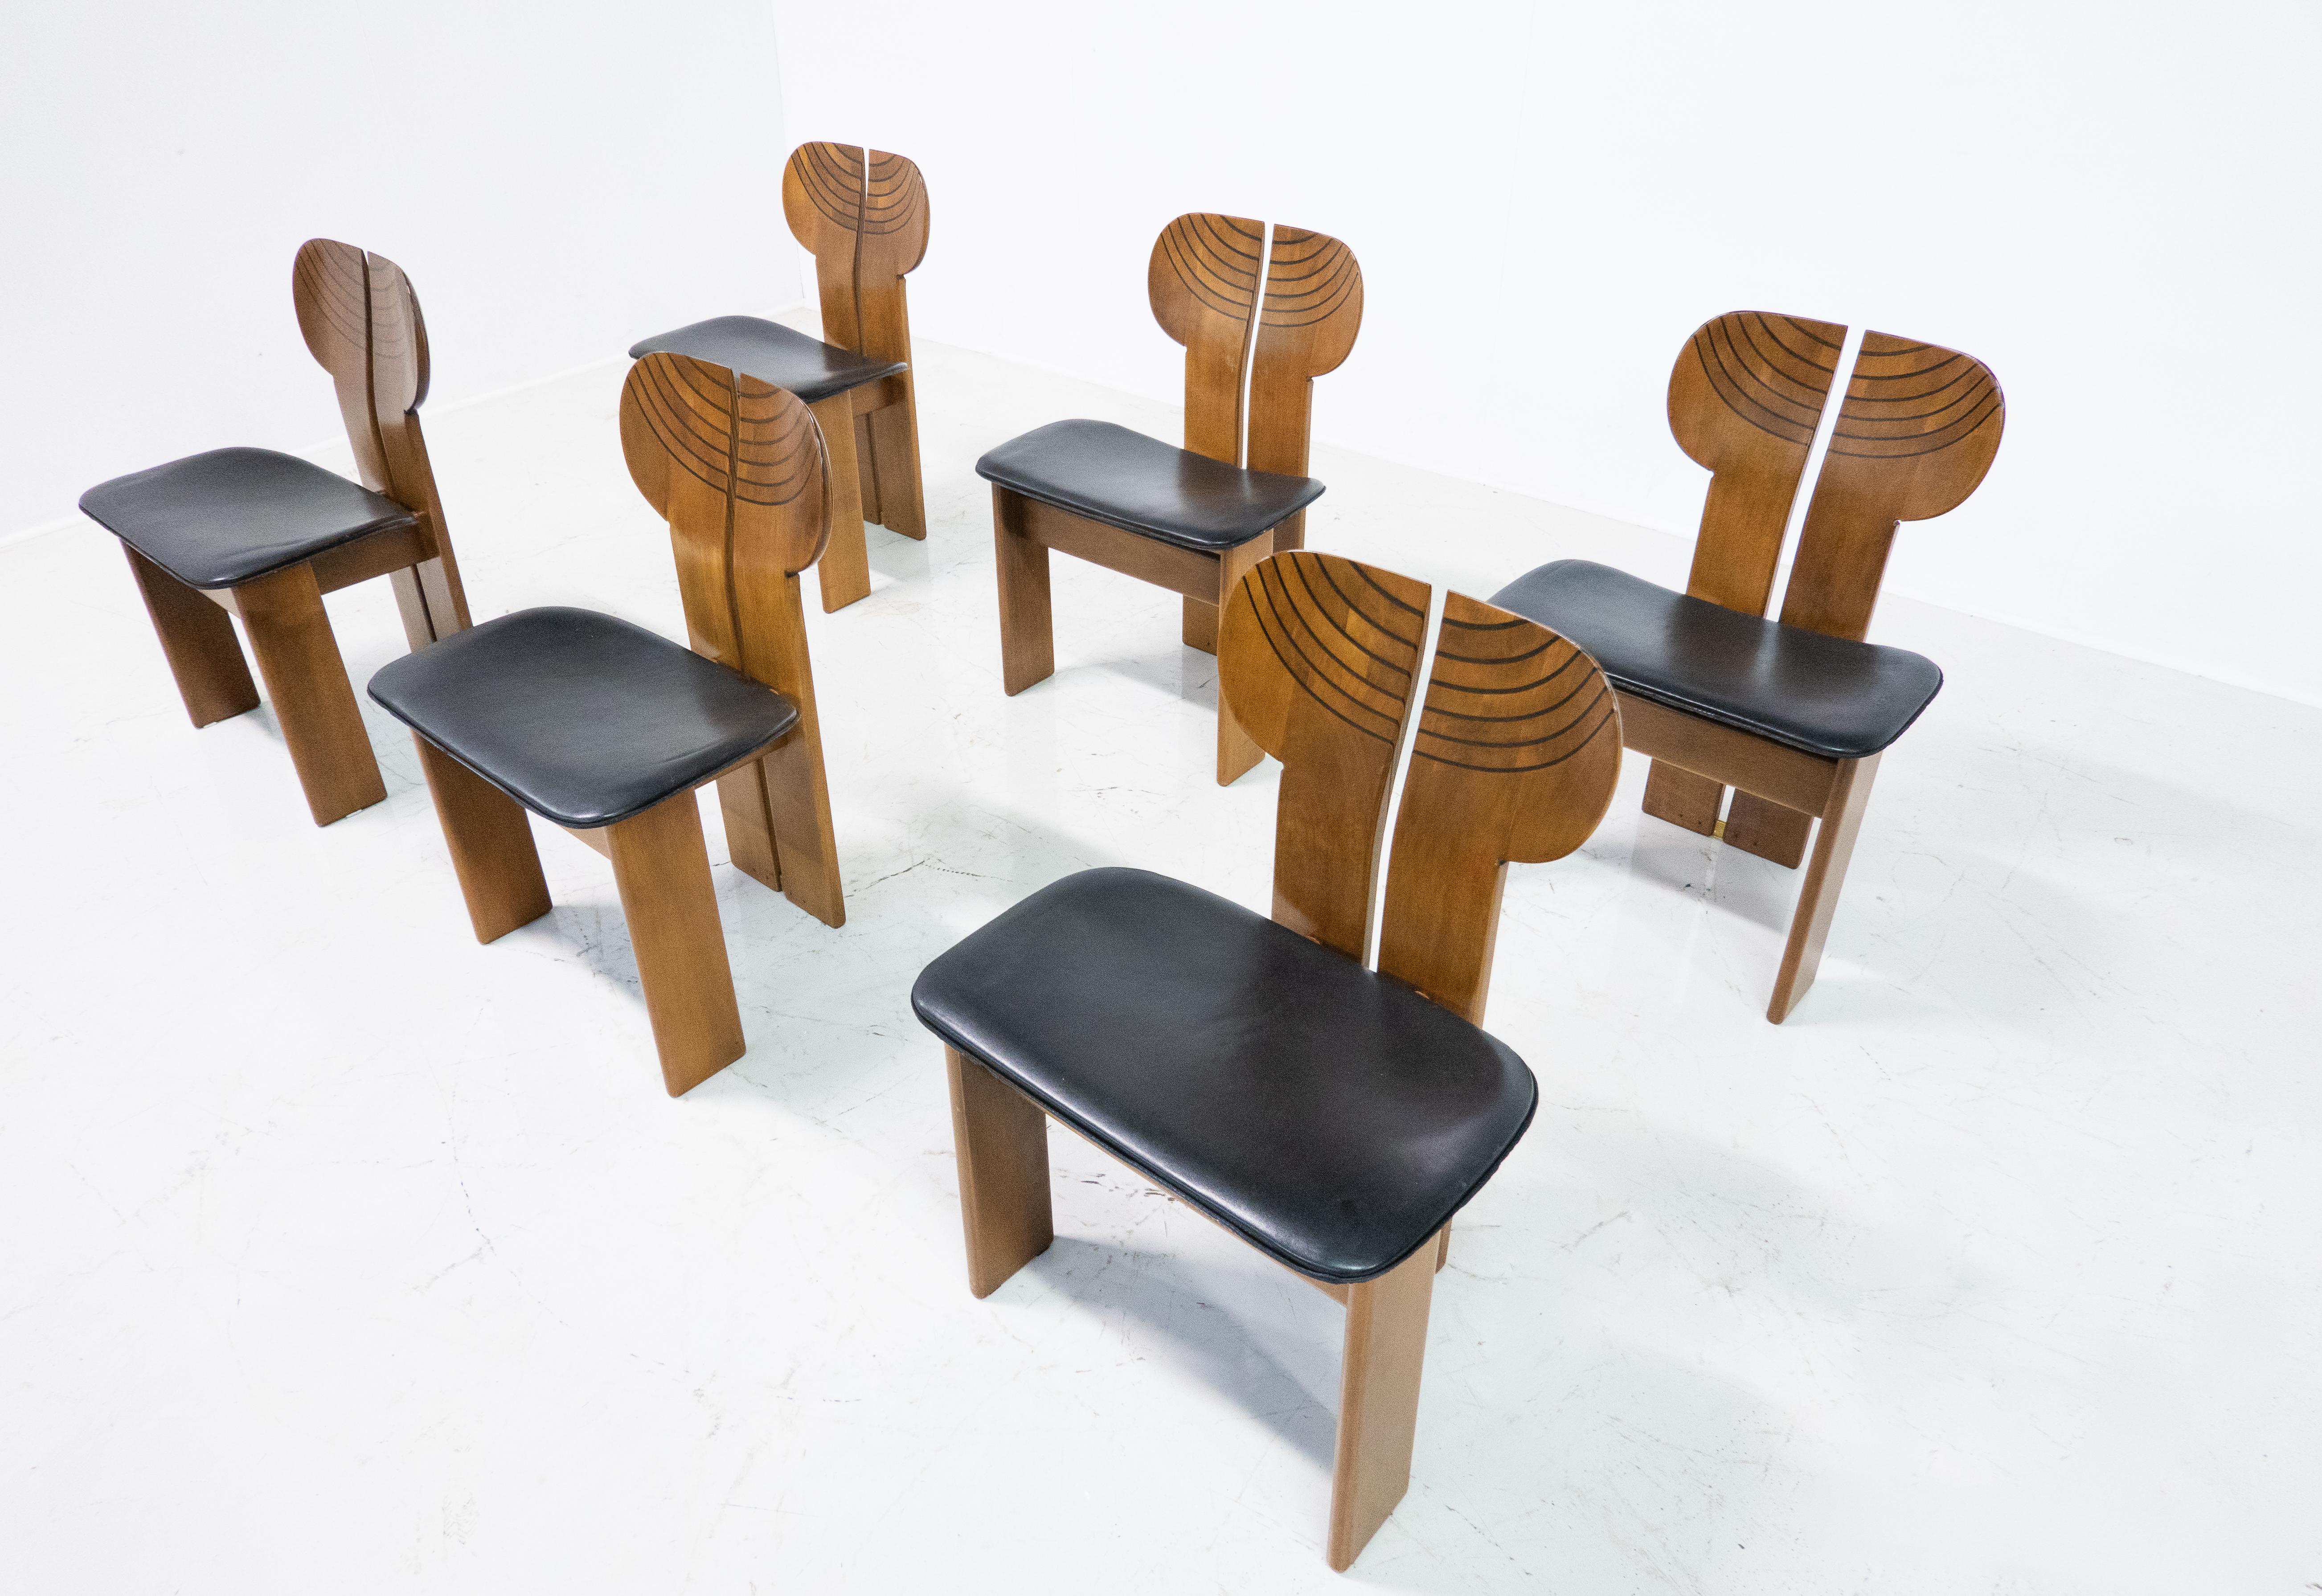 Late 20th Century Mid-Century Modern Set of 6 Africa Chairs by Afra & Tobia Scarpa for Maxalto